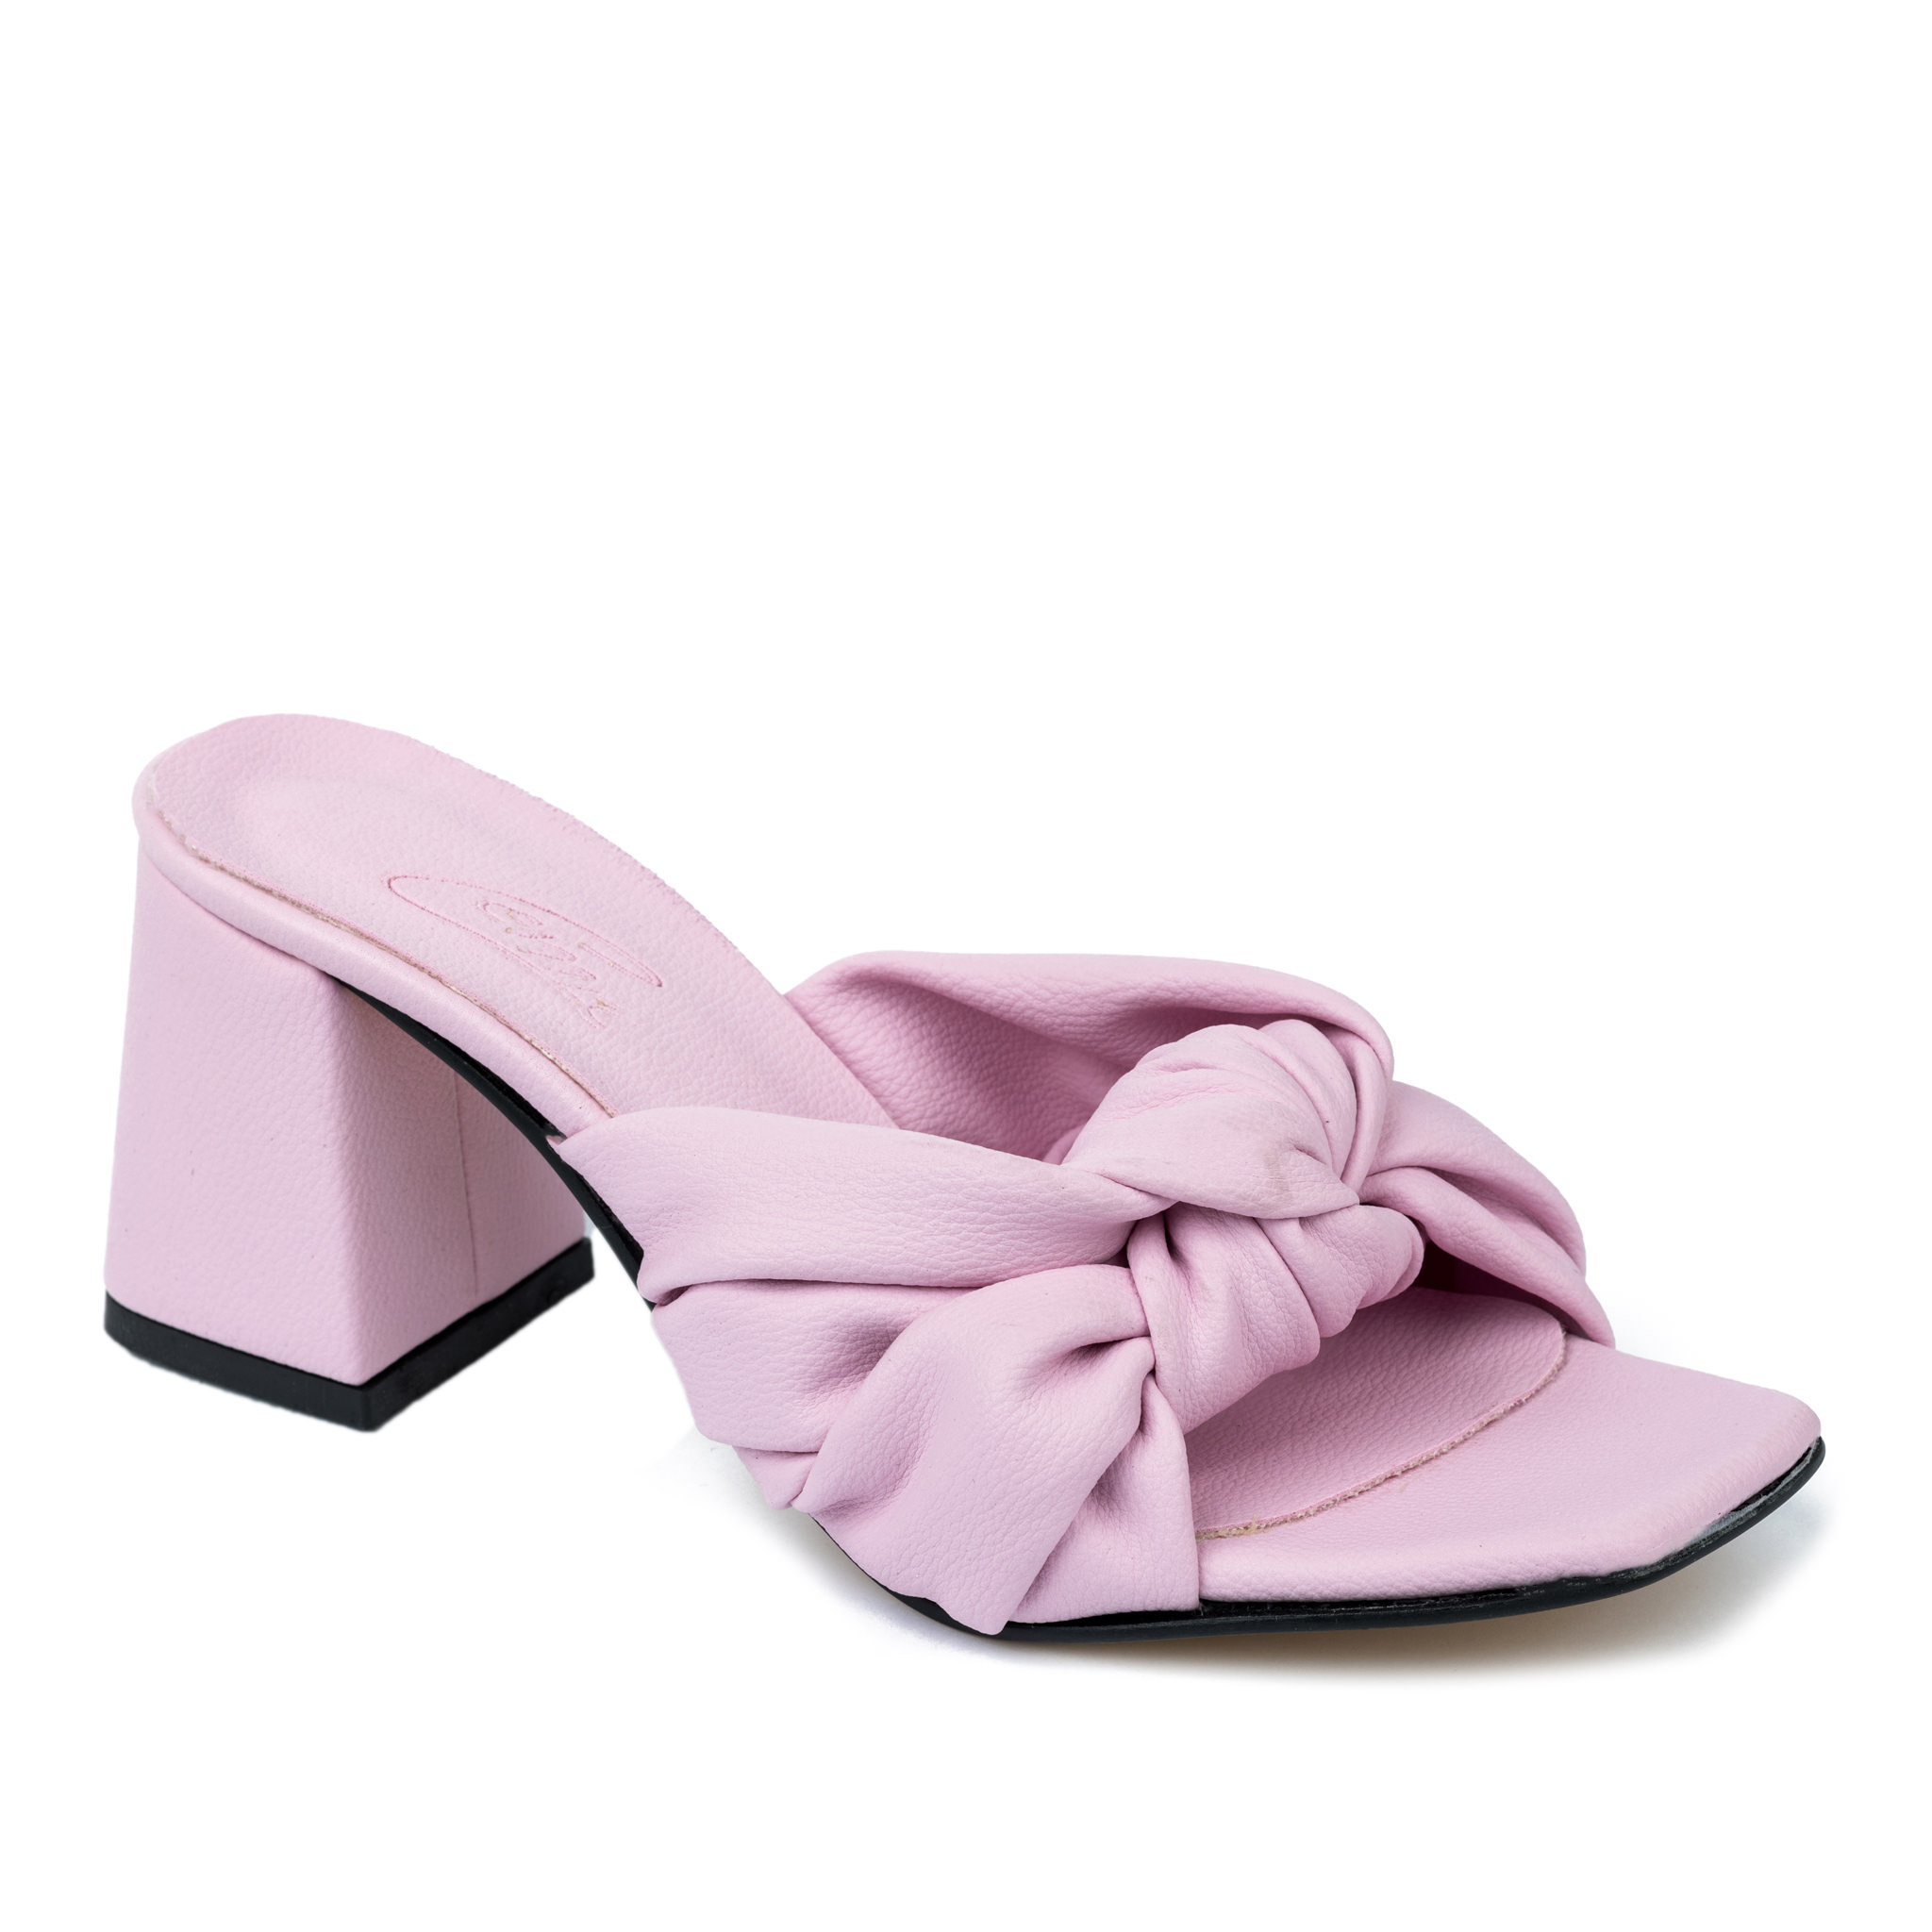 Women Slippers and Mules A249 - ROSE